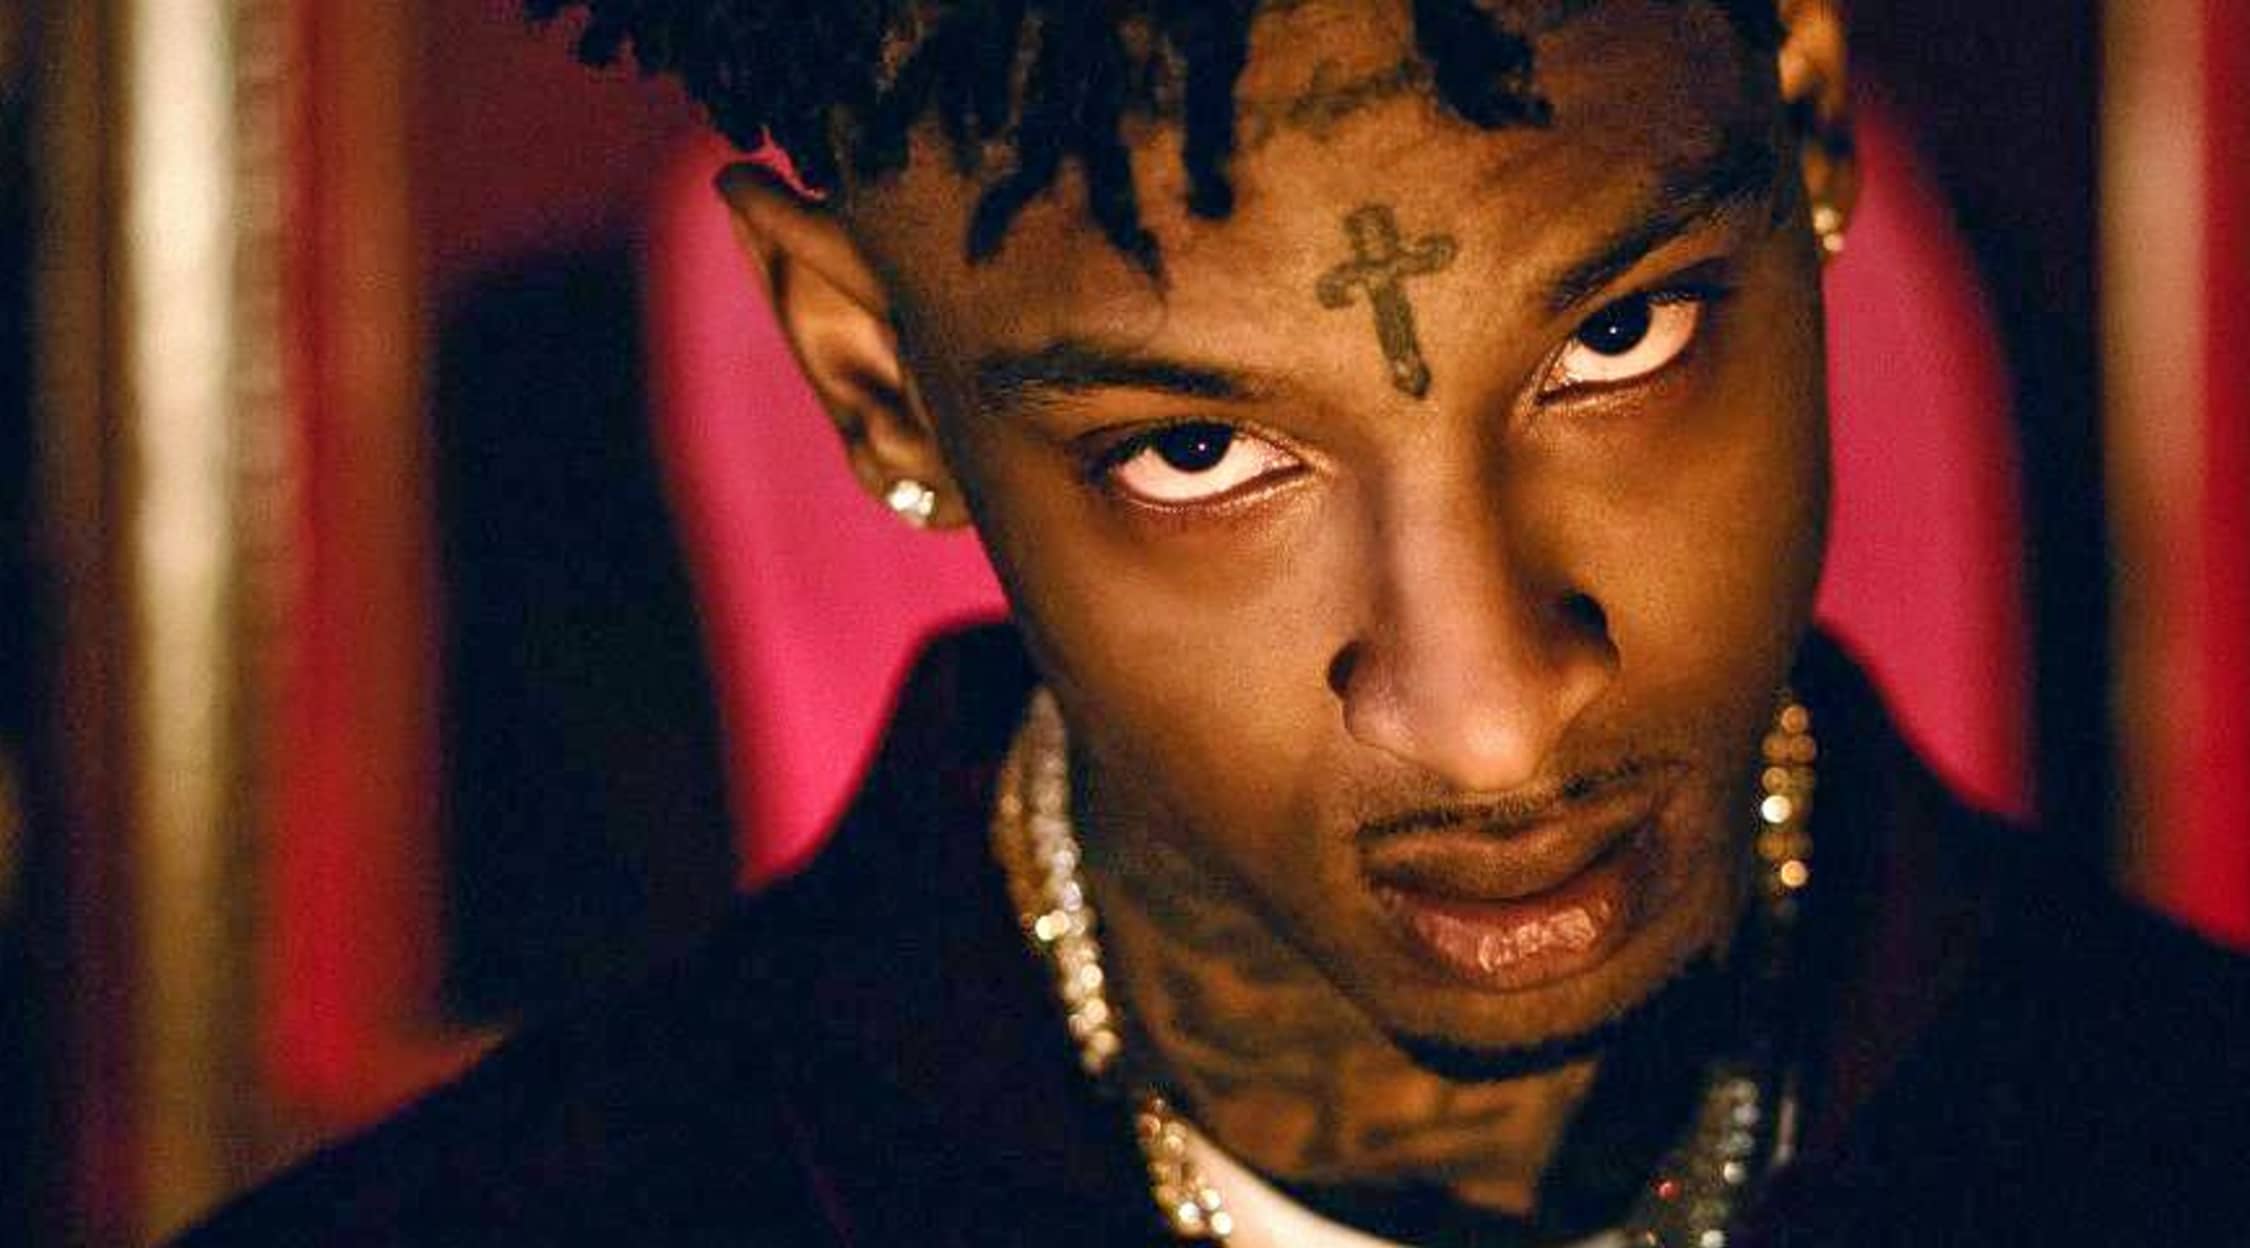 21 Savage's Blue Hair Inspires New Hair Color Trend - wide 9